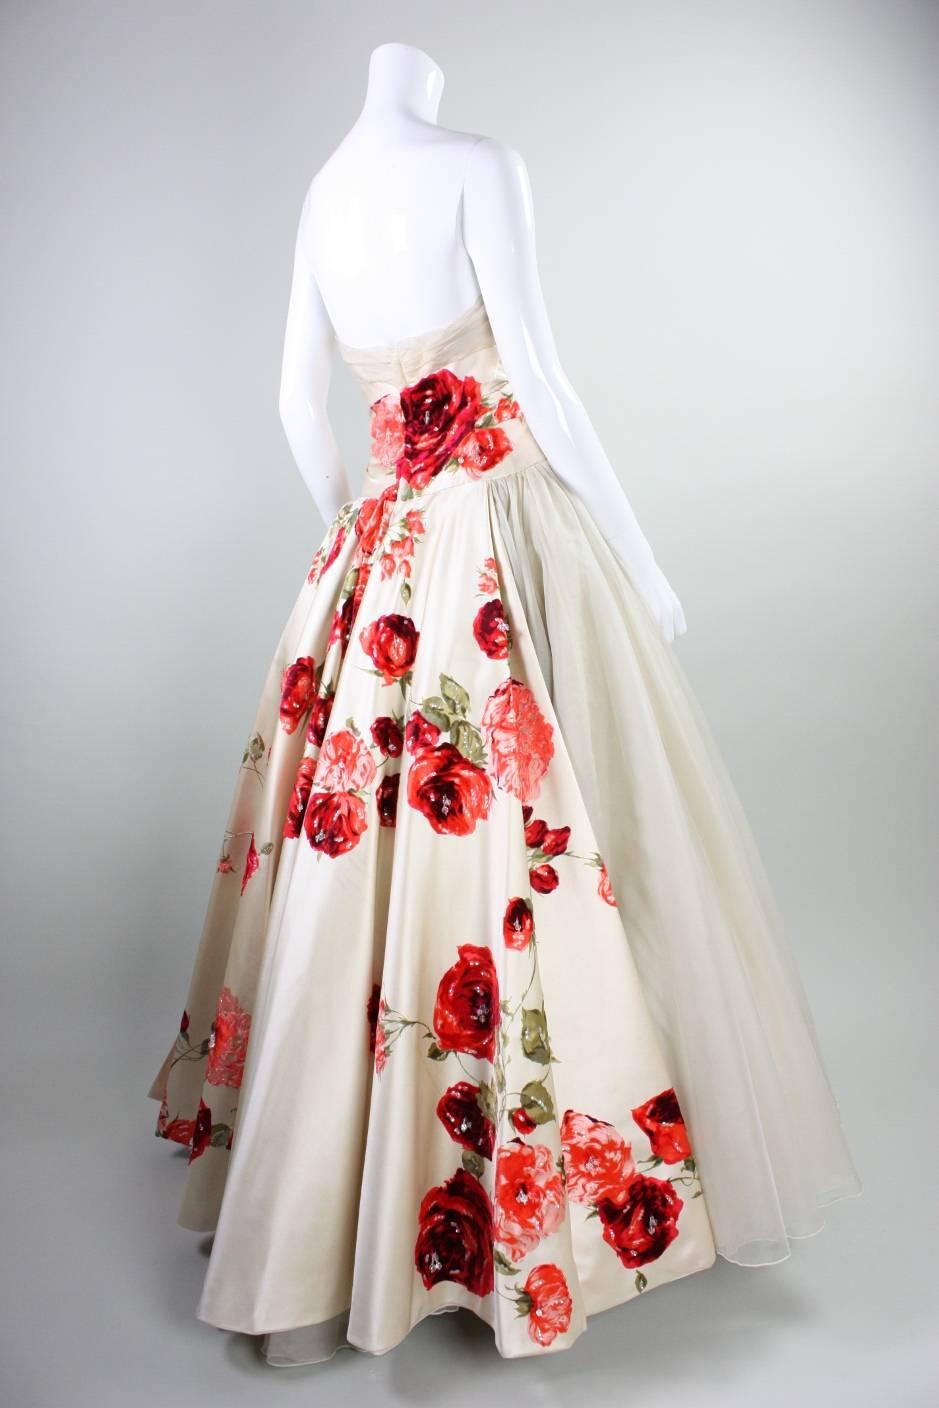 Women's 1950's Organza Ball Gown with Floral Detailing For Sale